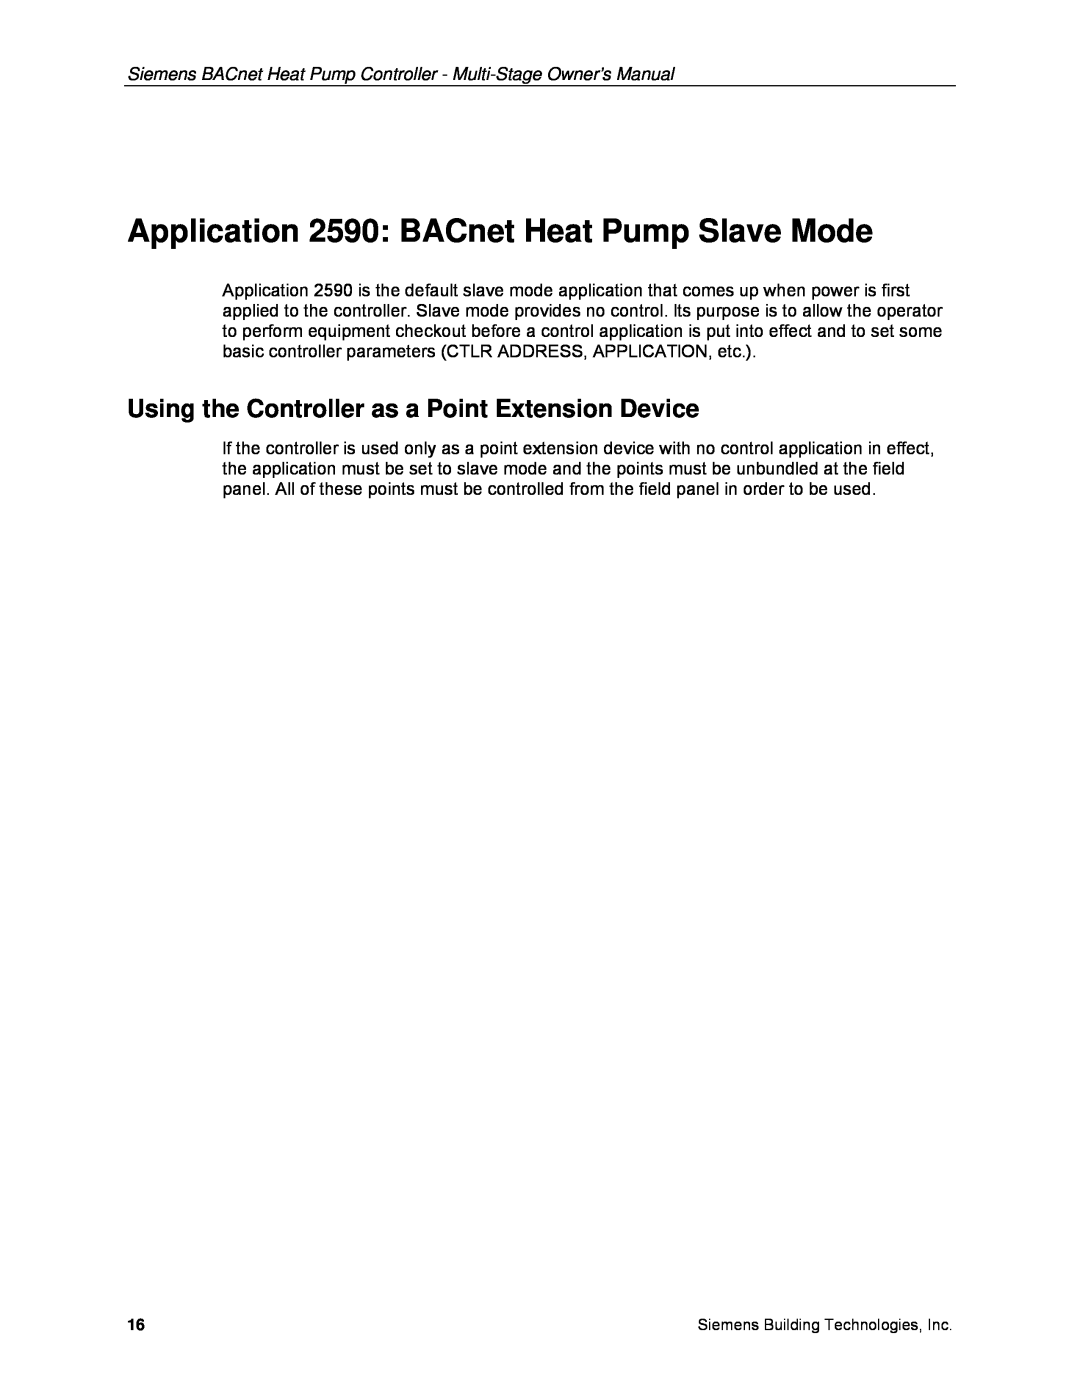 Siemens 125-699 owner manual Application 2590 BACnet Heat Pump Slave Mode, Using the Controller as a Point Extension Device 